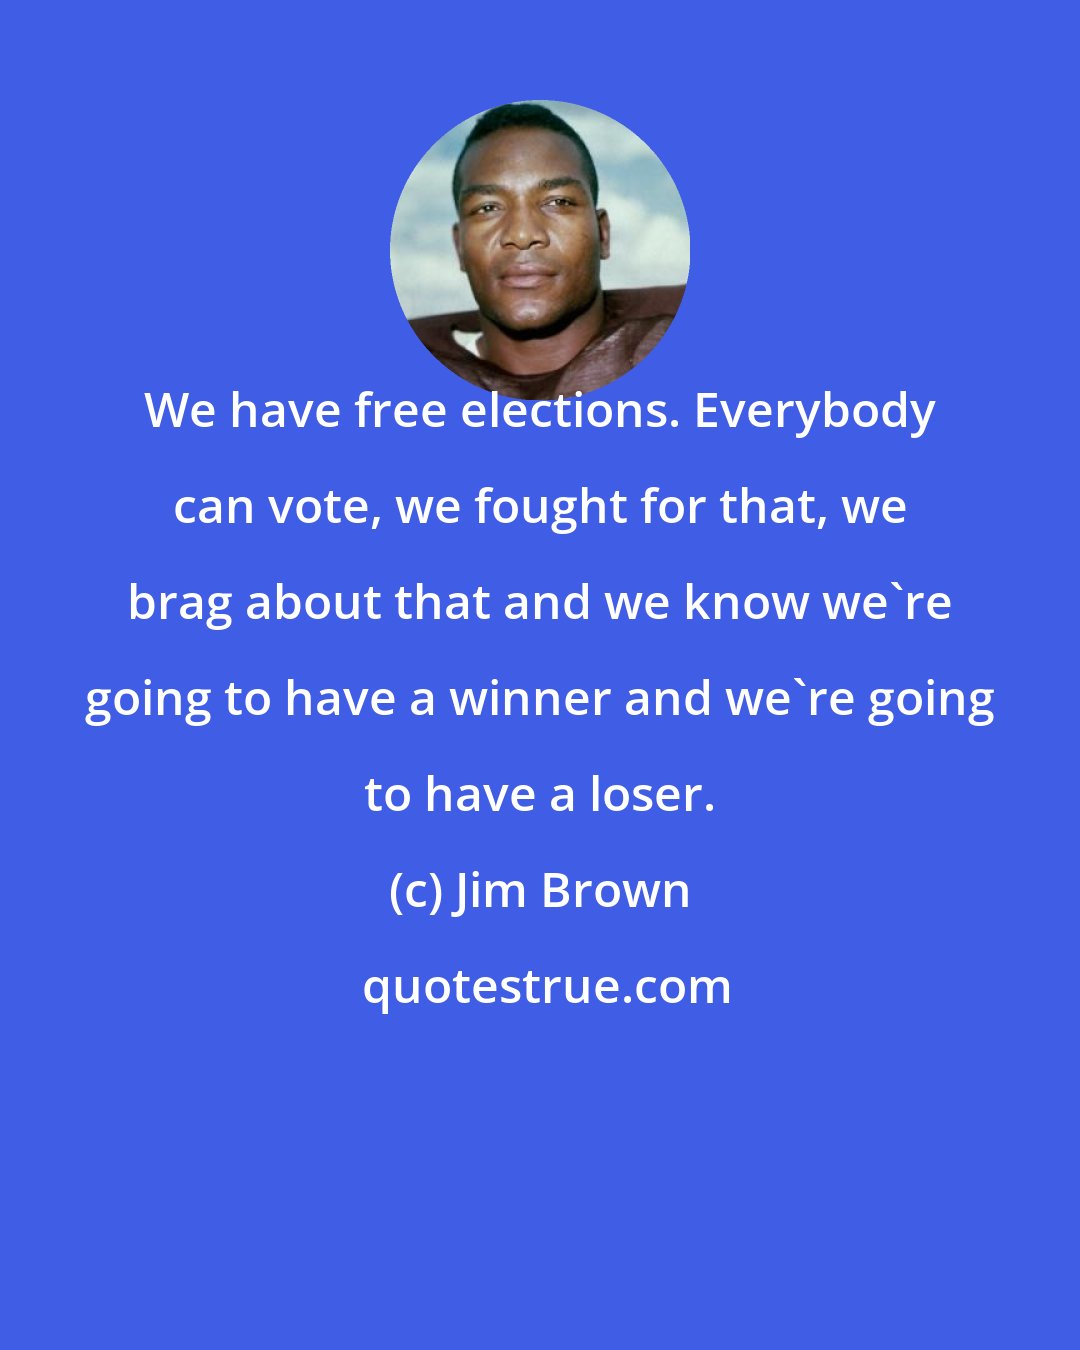 Jim Brown: We have free elections. Everybody can vote, we fought for that, we brag about that and we know we're going to have a winner and we're going to have a loser.